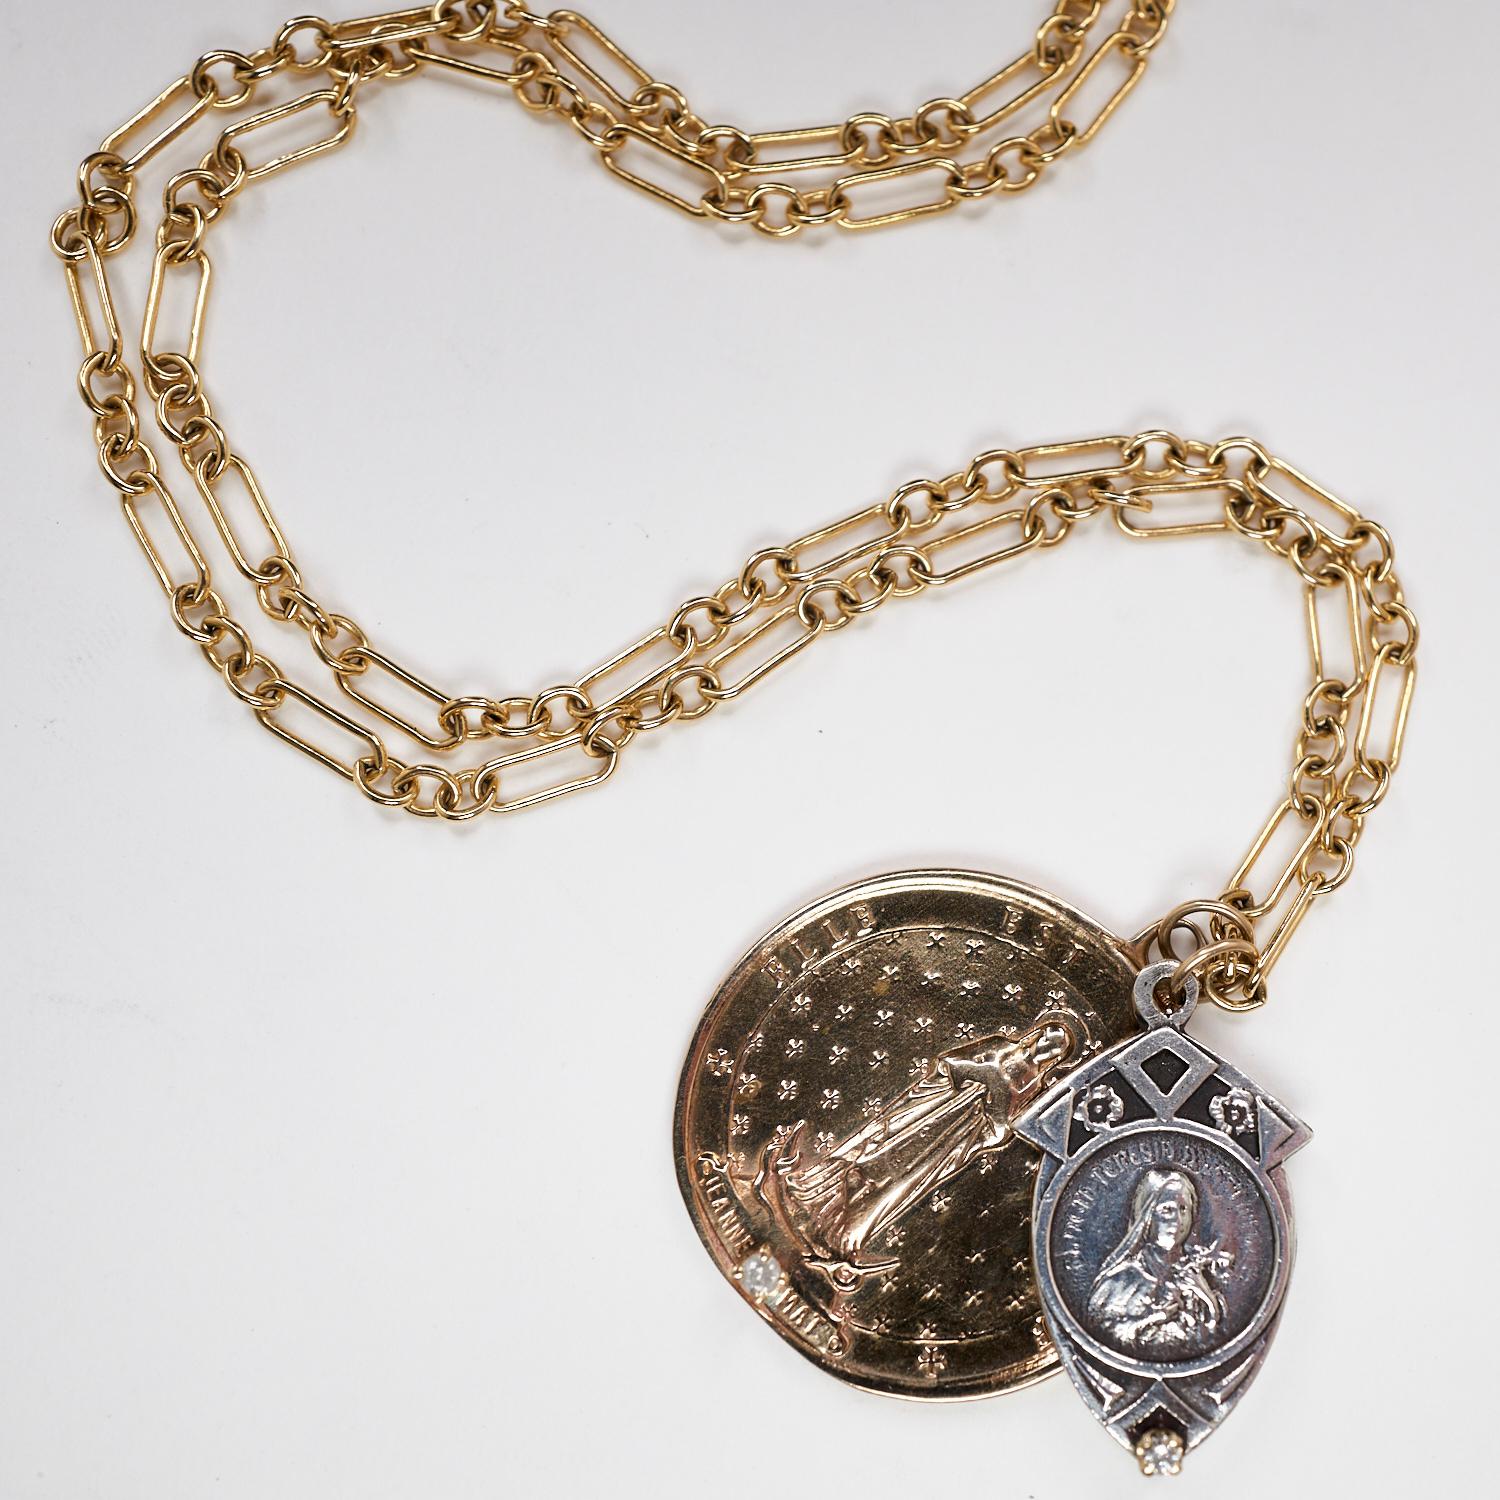 Victorian Medal Necklace White Diamond Chunky Chain Coin Pendant Virgin Mary J Dauphin For Sale